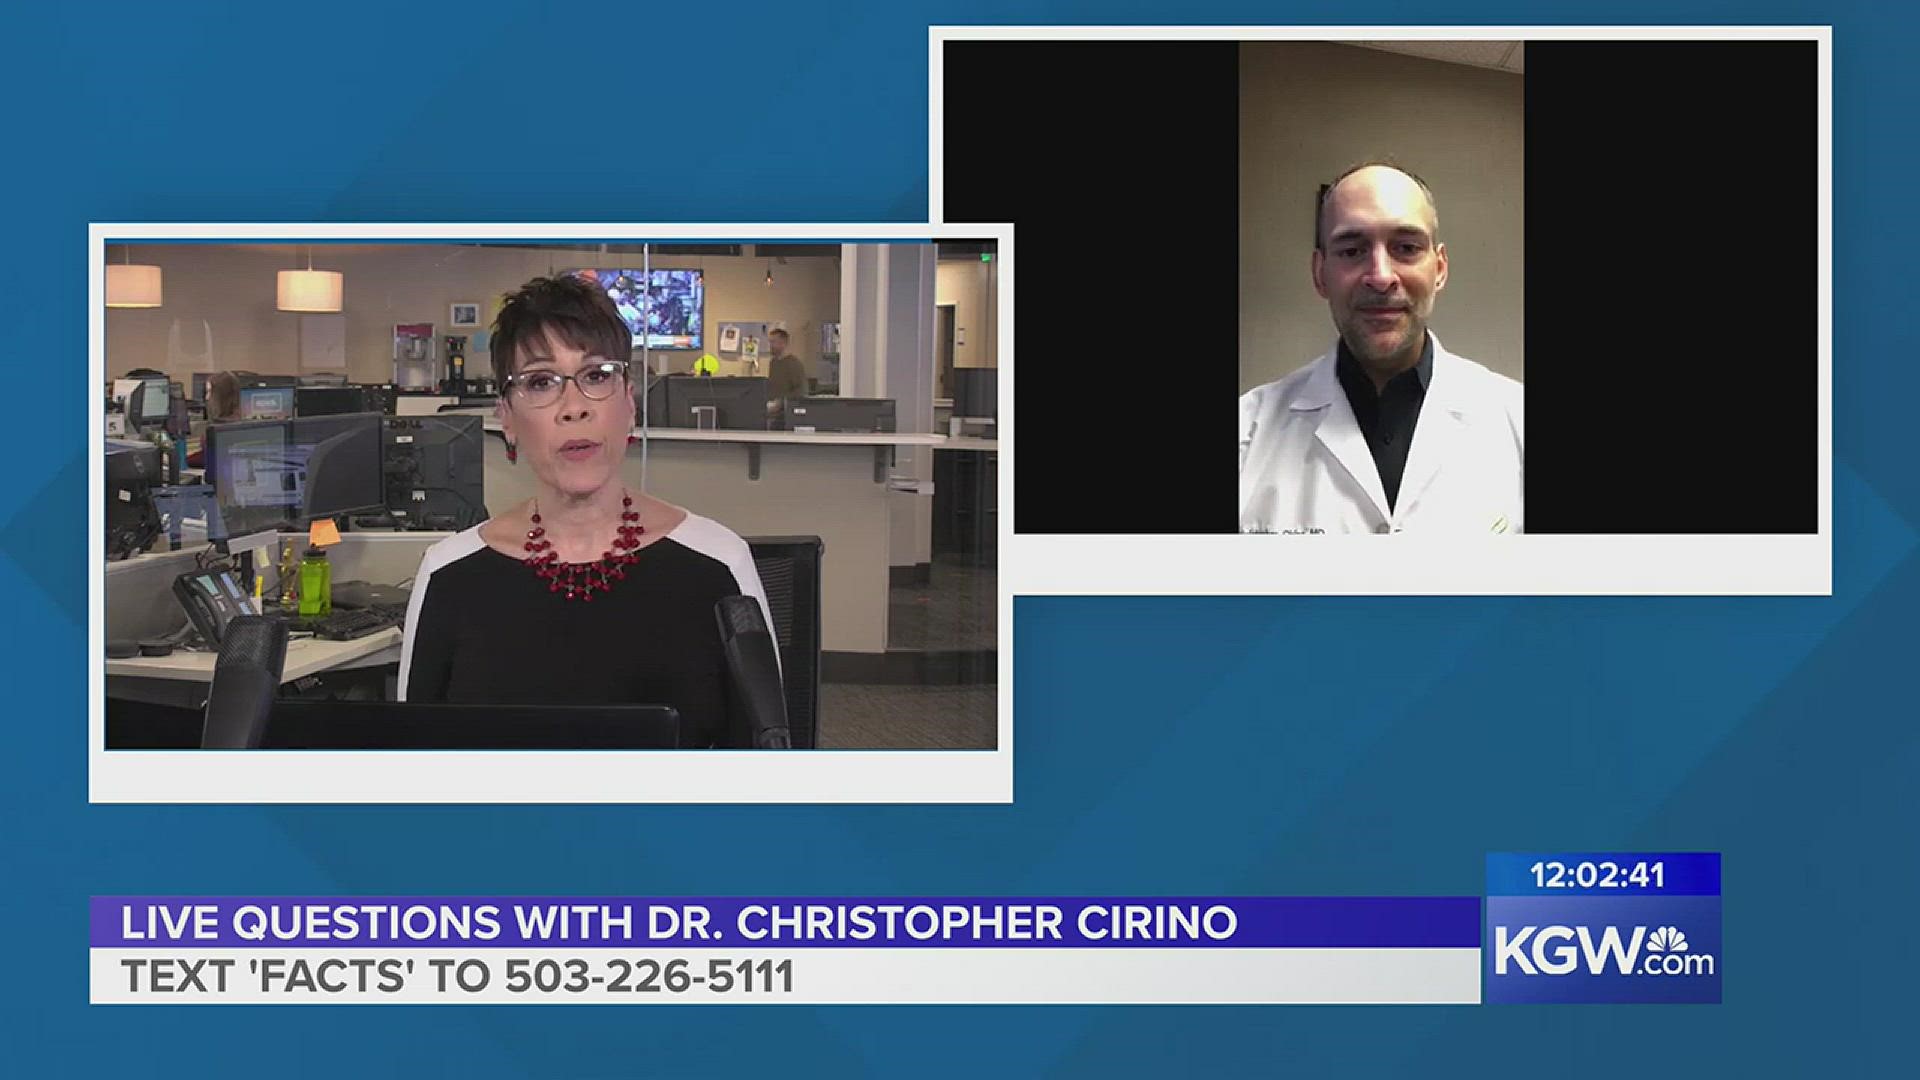 Dr. Christopher Cirino, an infectious disease specialist with Adventist Health, answers people's questions about the coronavirus.